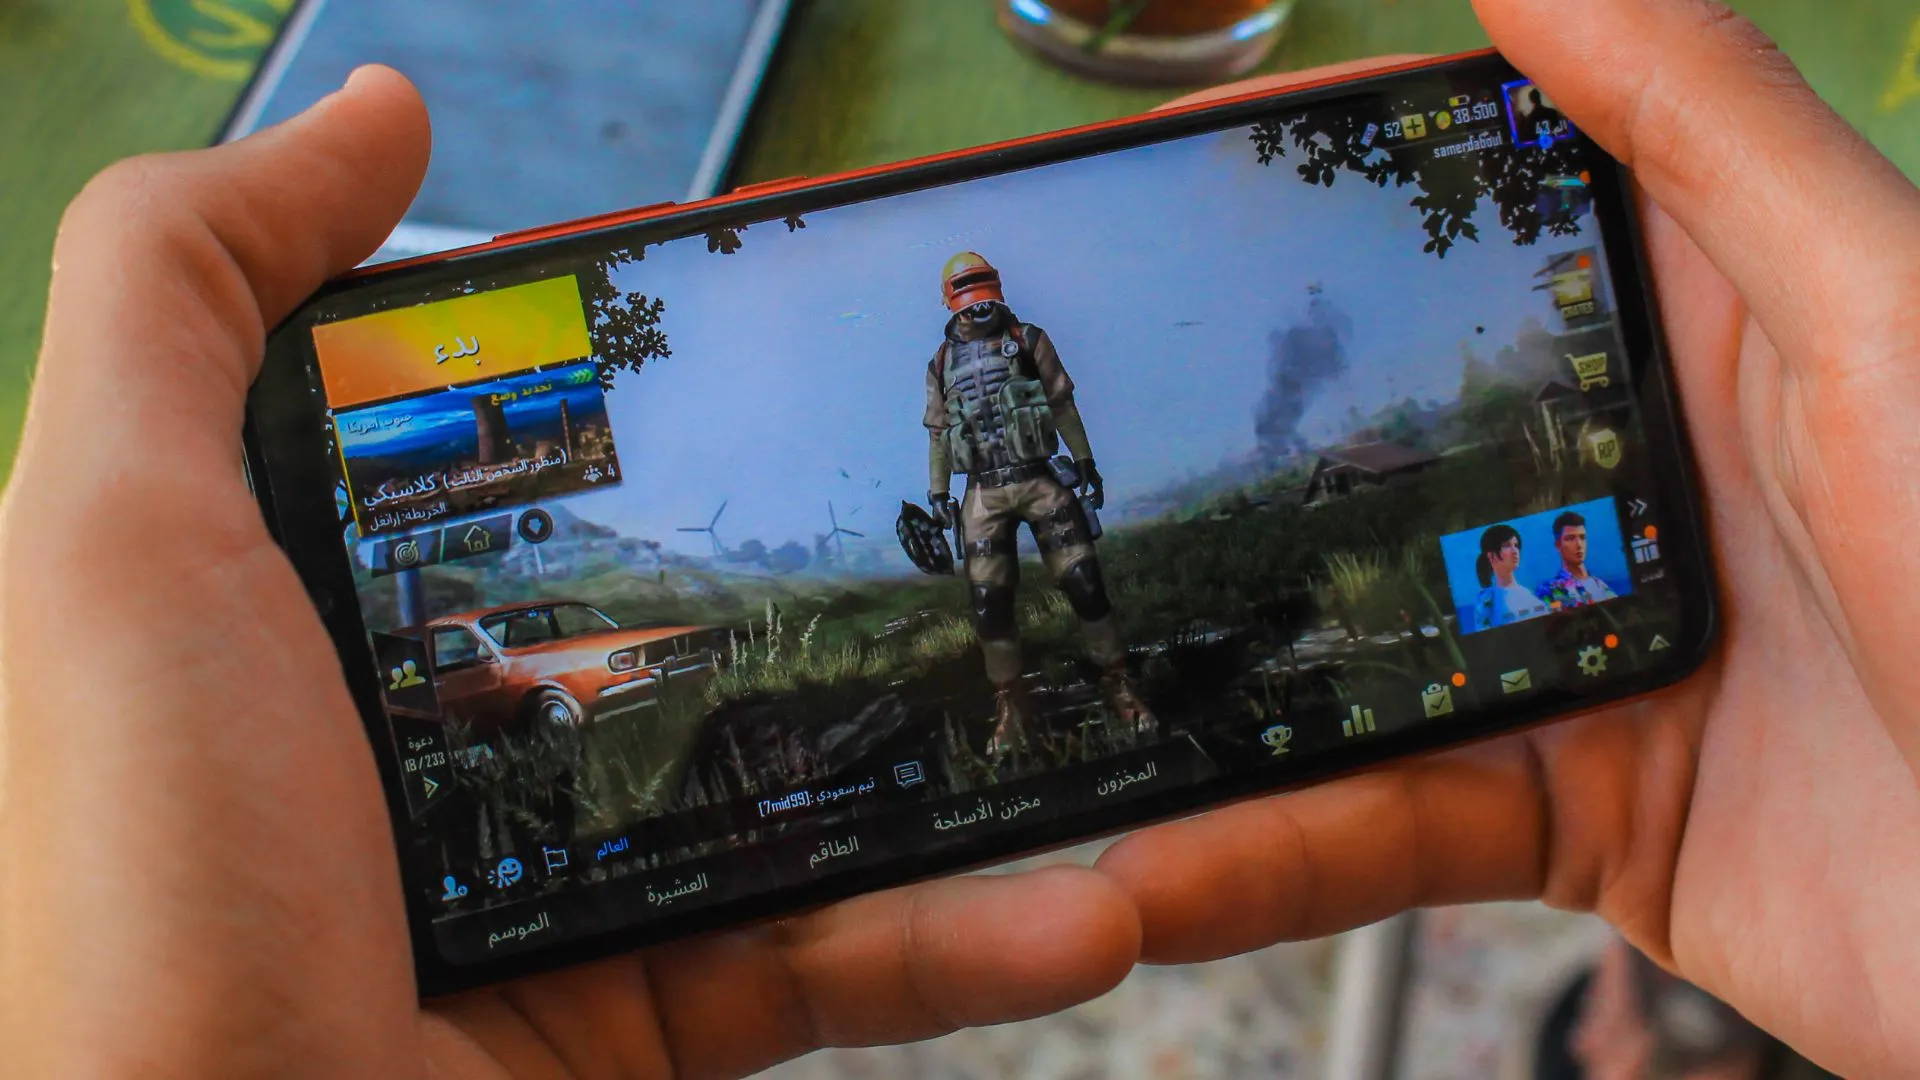 How Reliable are iPhones for Mobile Gaming?